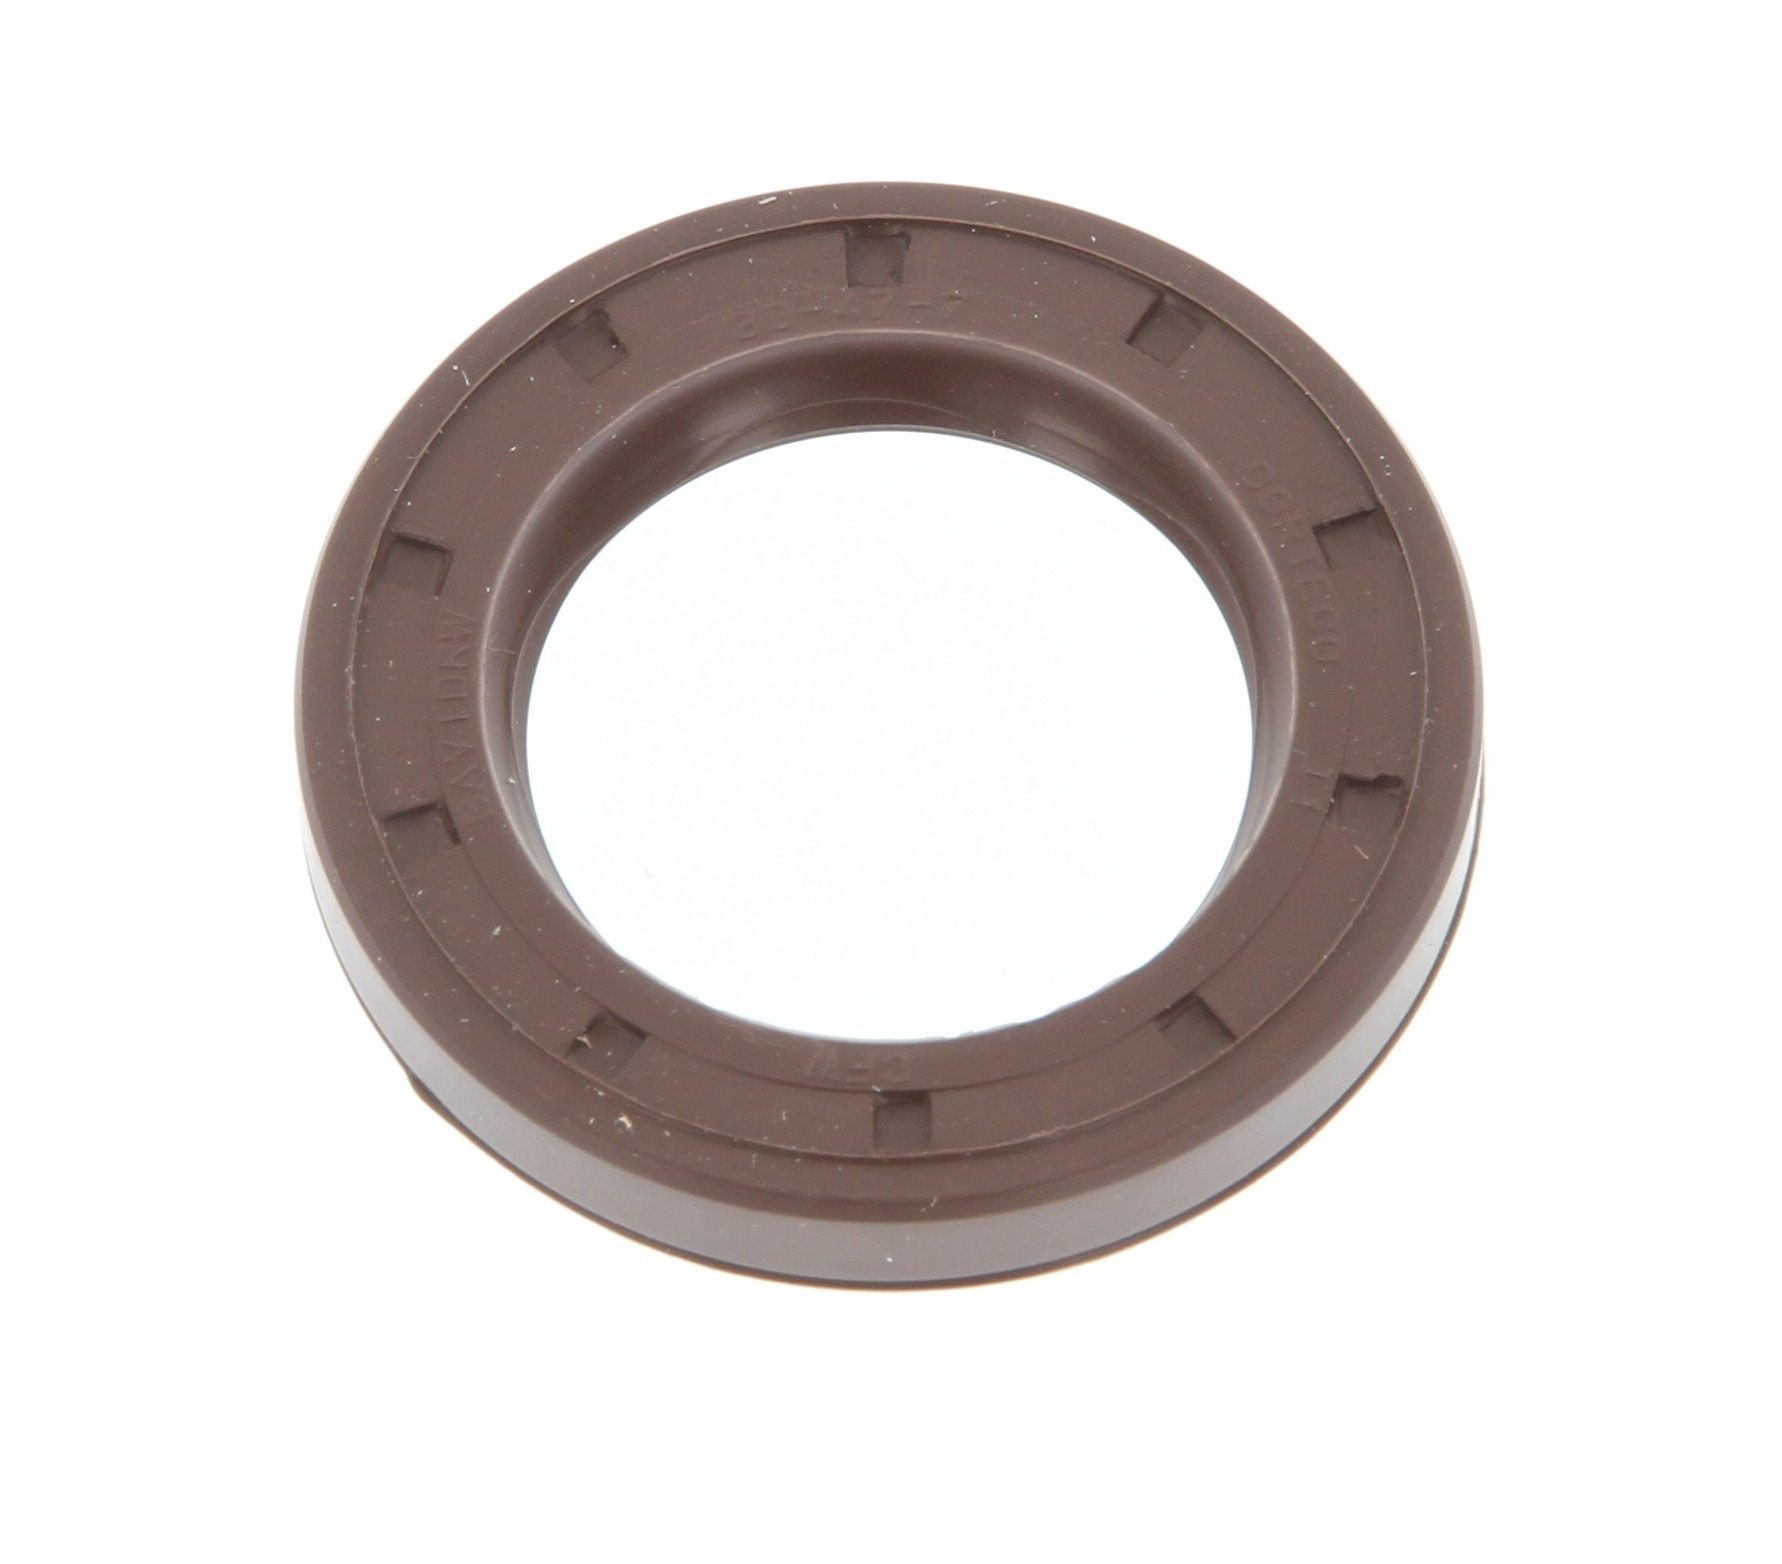 Iveco Camshaft seal CORTECO 12001192B at a good price